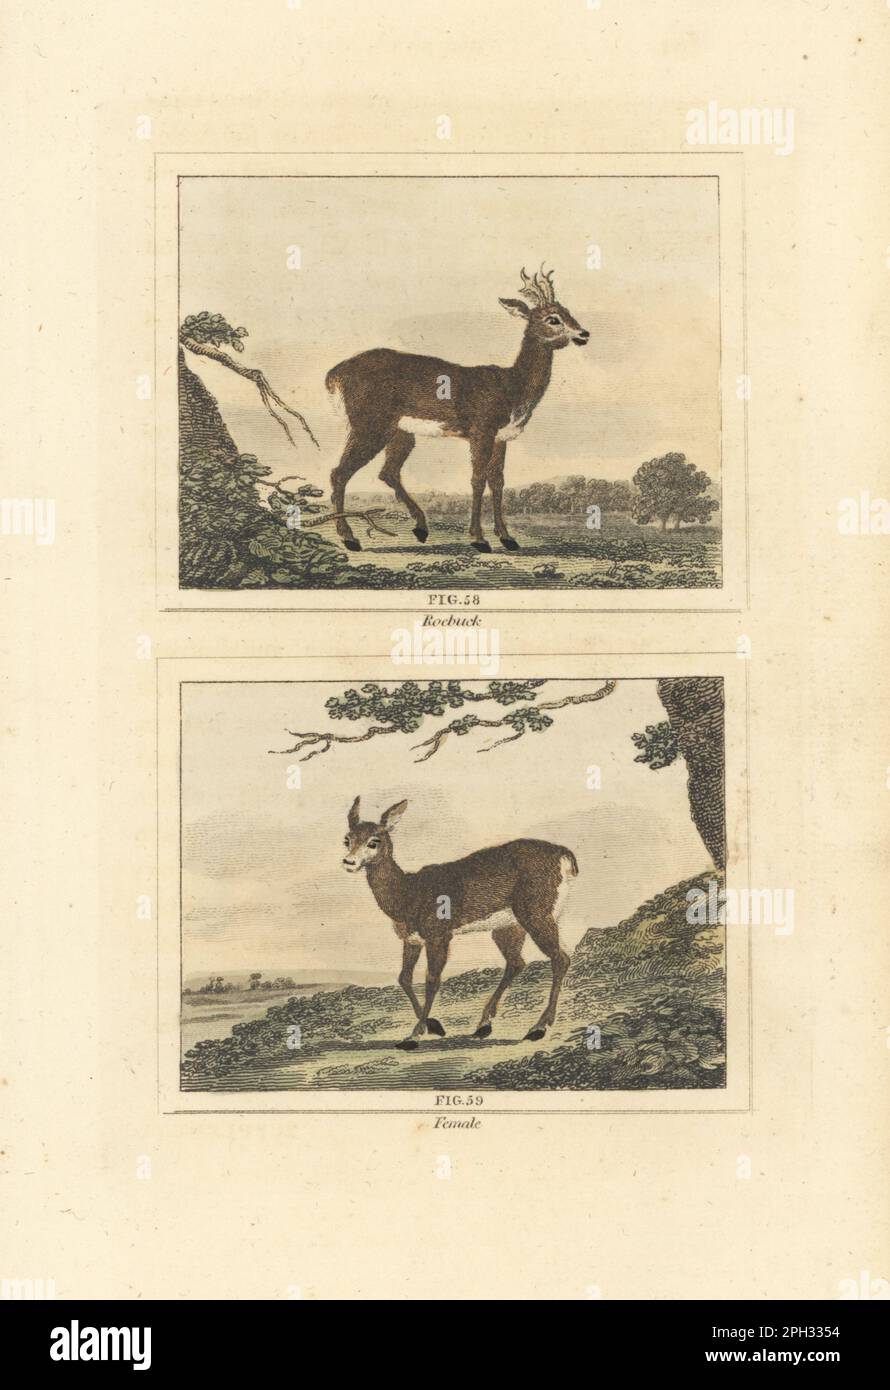 Roe deer, Capreolus capreolus, buck 58 and doe 59. Handcoloured copperplate engraving after Jacques de Seve from James Smith Barr’s edition of Comte Buffon’s Natural History, A Theory of the Earth, General History of Man, Brute Creation, Vegetables, Minerals, T. Gillet, H. D. Symonds, Paternoster Row, London, 1807. Stock Photo